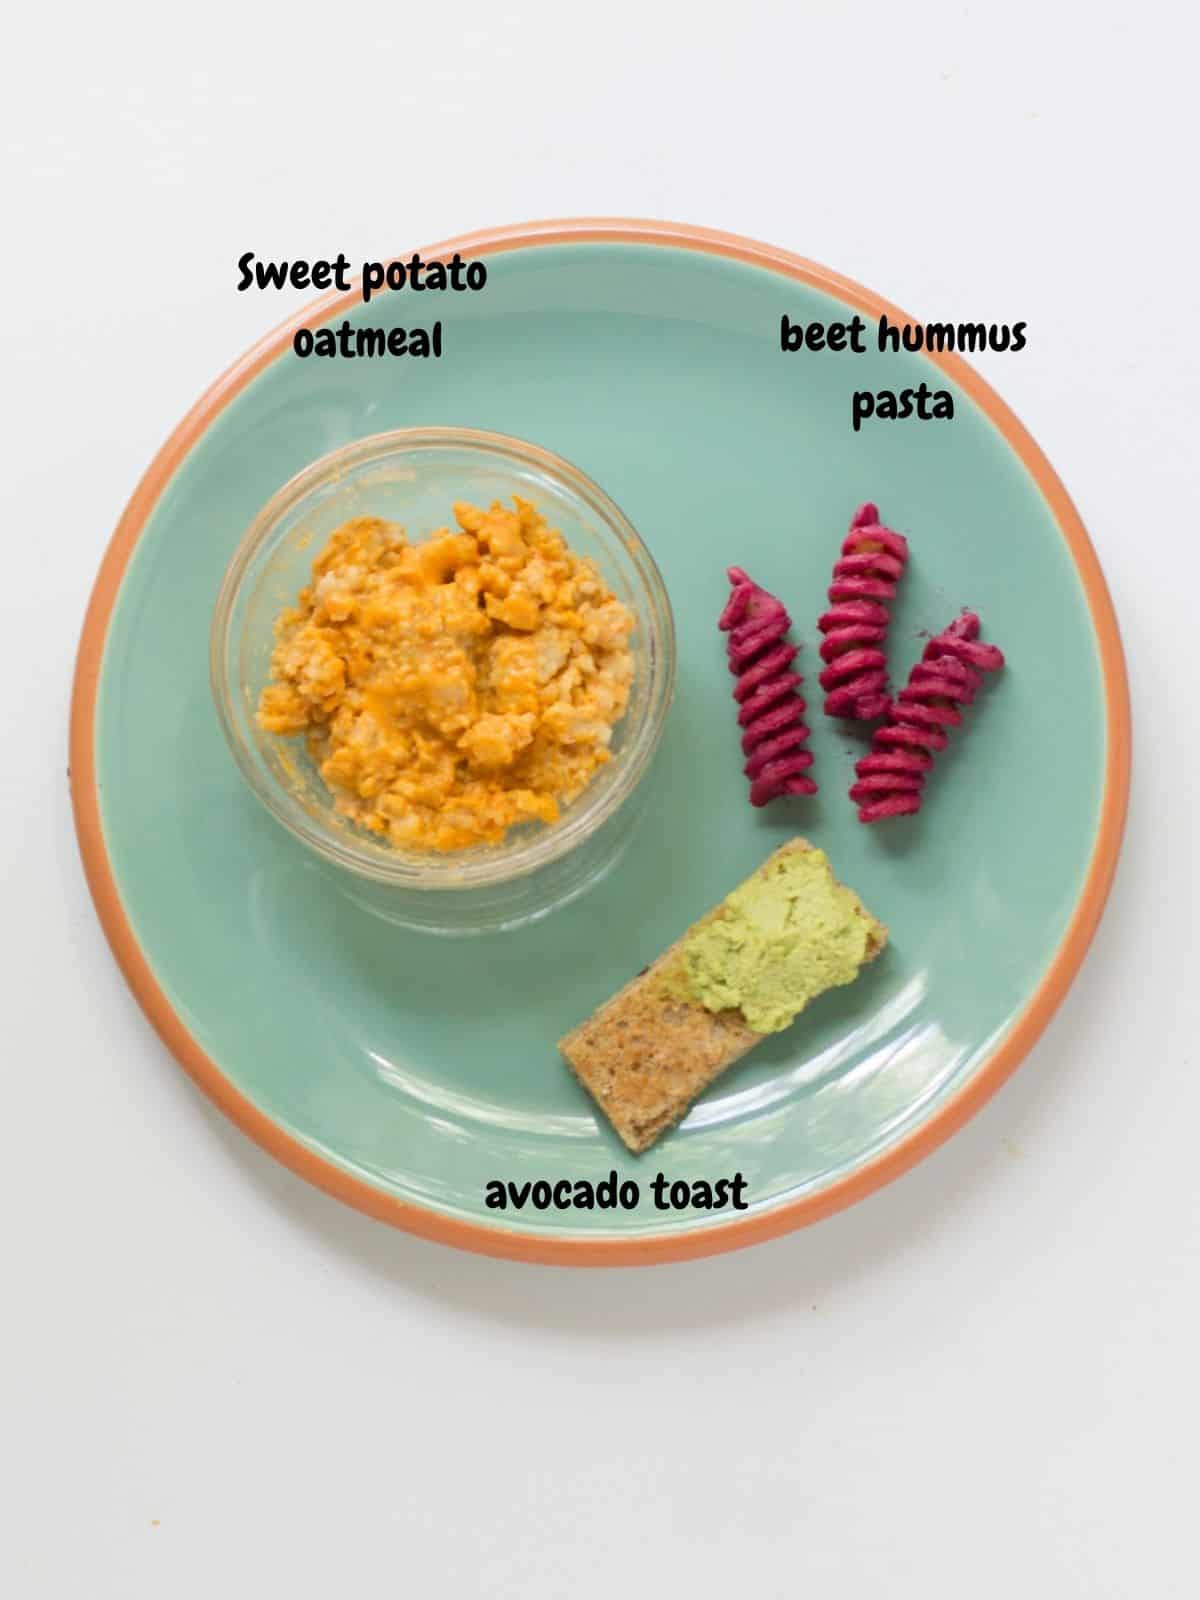 sweet potato oatmeal in a bowl, pasta with beet hummus, and toast with mashed avocado.